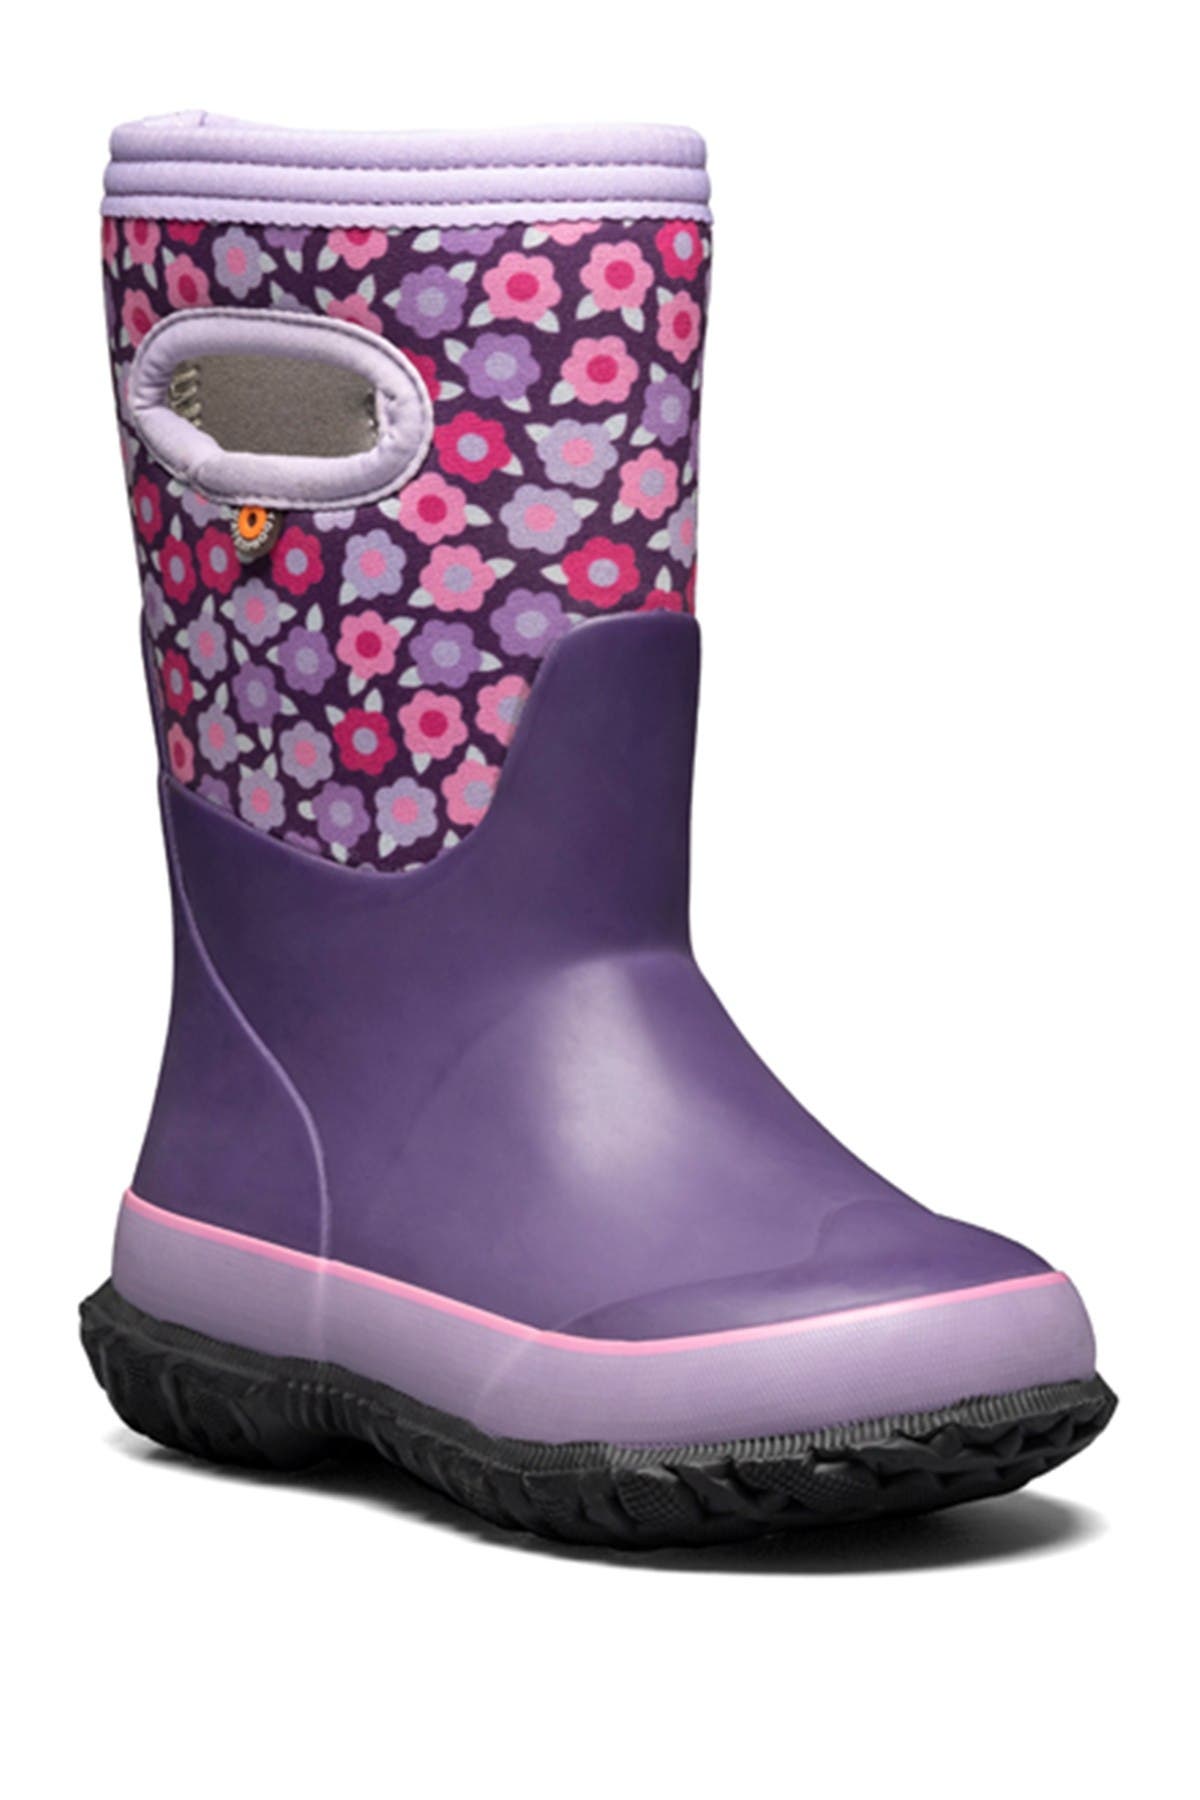 bogs winter boots for girls